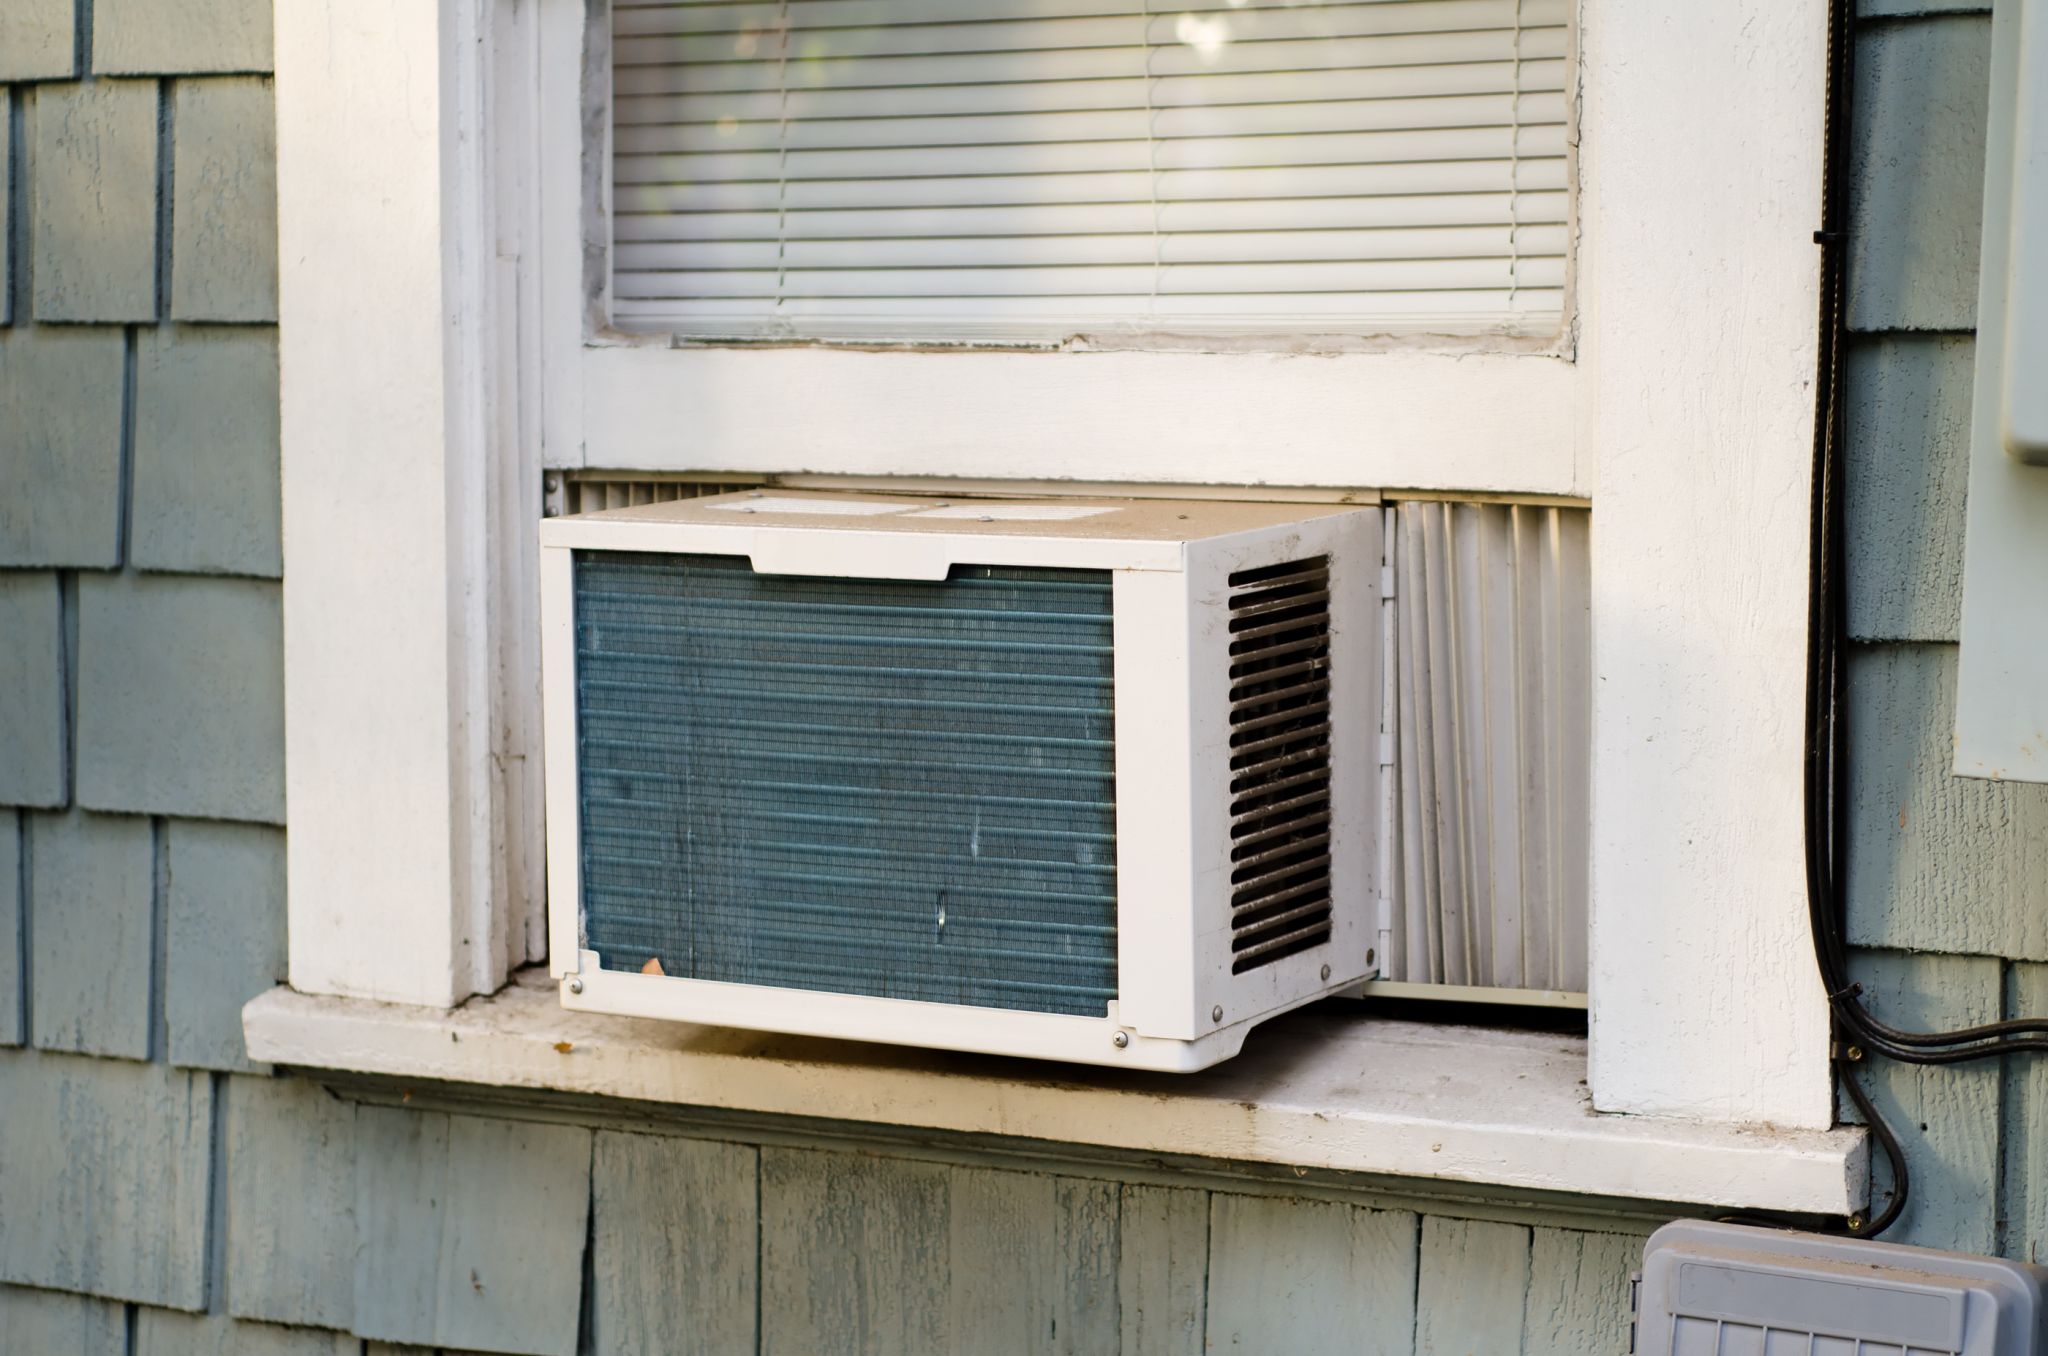 How To Measure A Window For An Air Conditioner